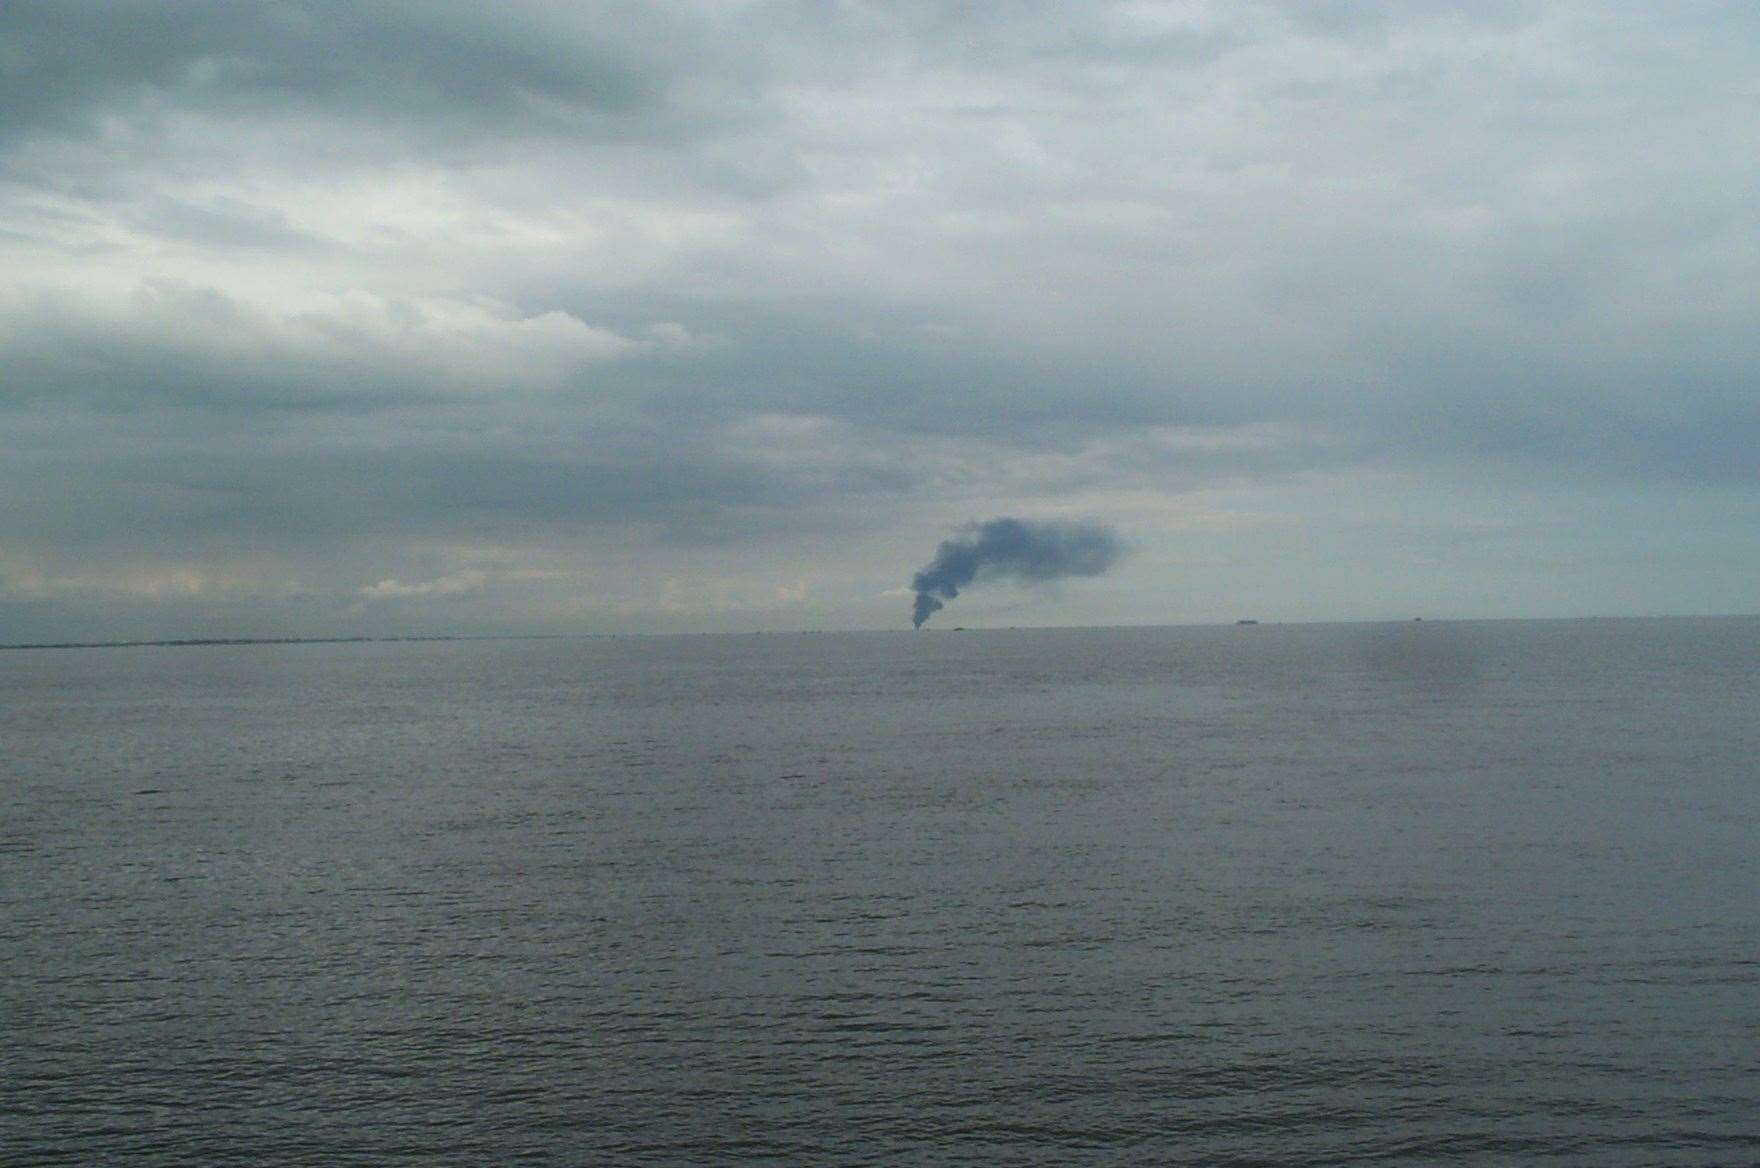 A plume of smoke from Shoeburyness could be seen from the Sheerness seafront